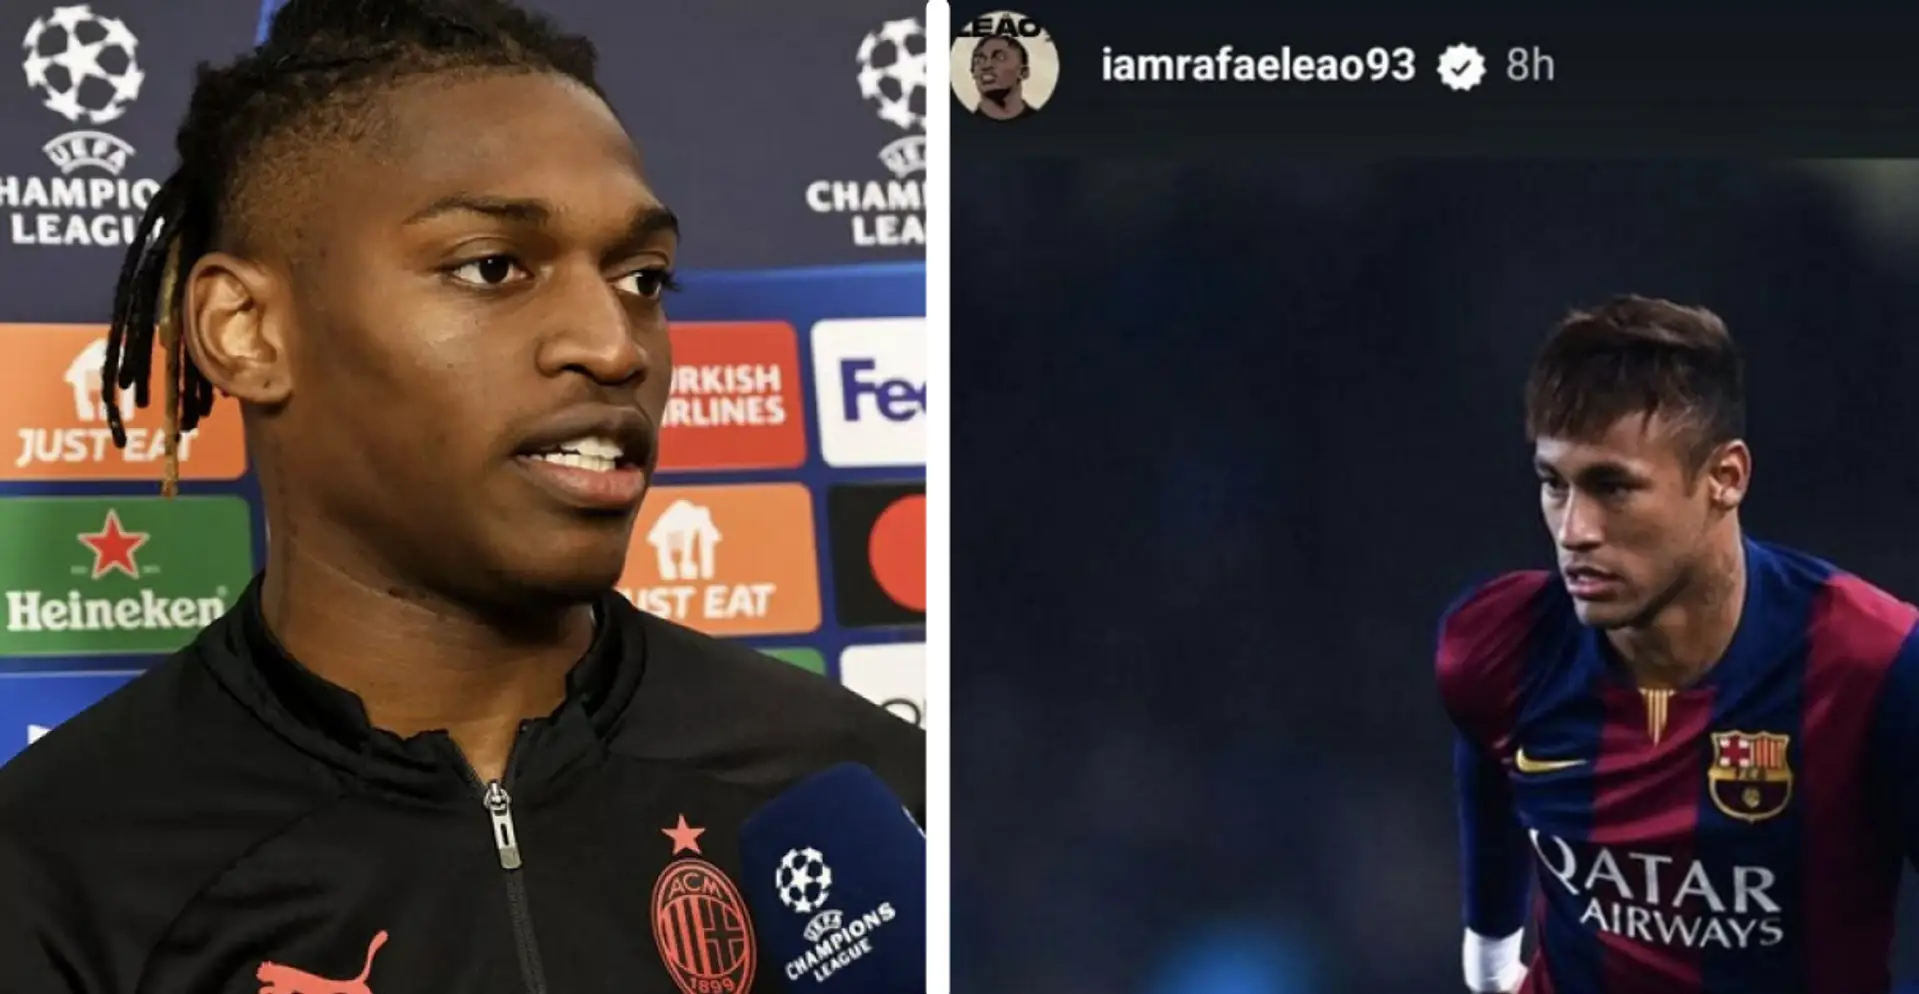 'If you know, you know': Rafael Leao shares very special Neymar pic